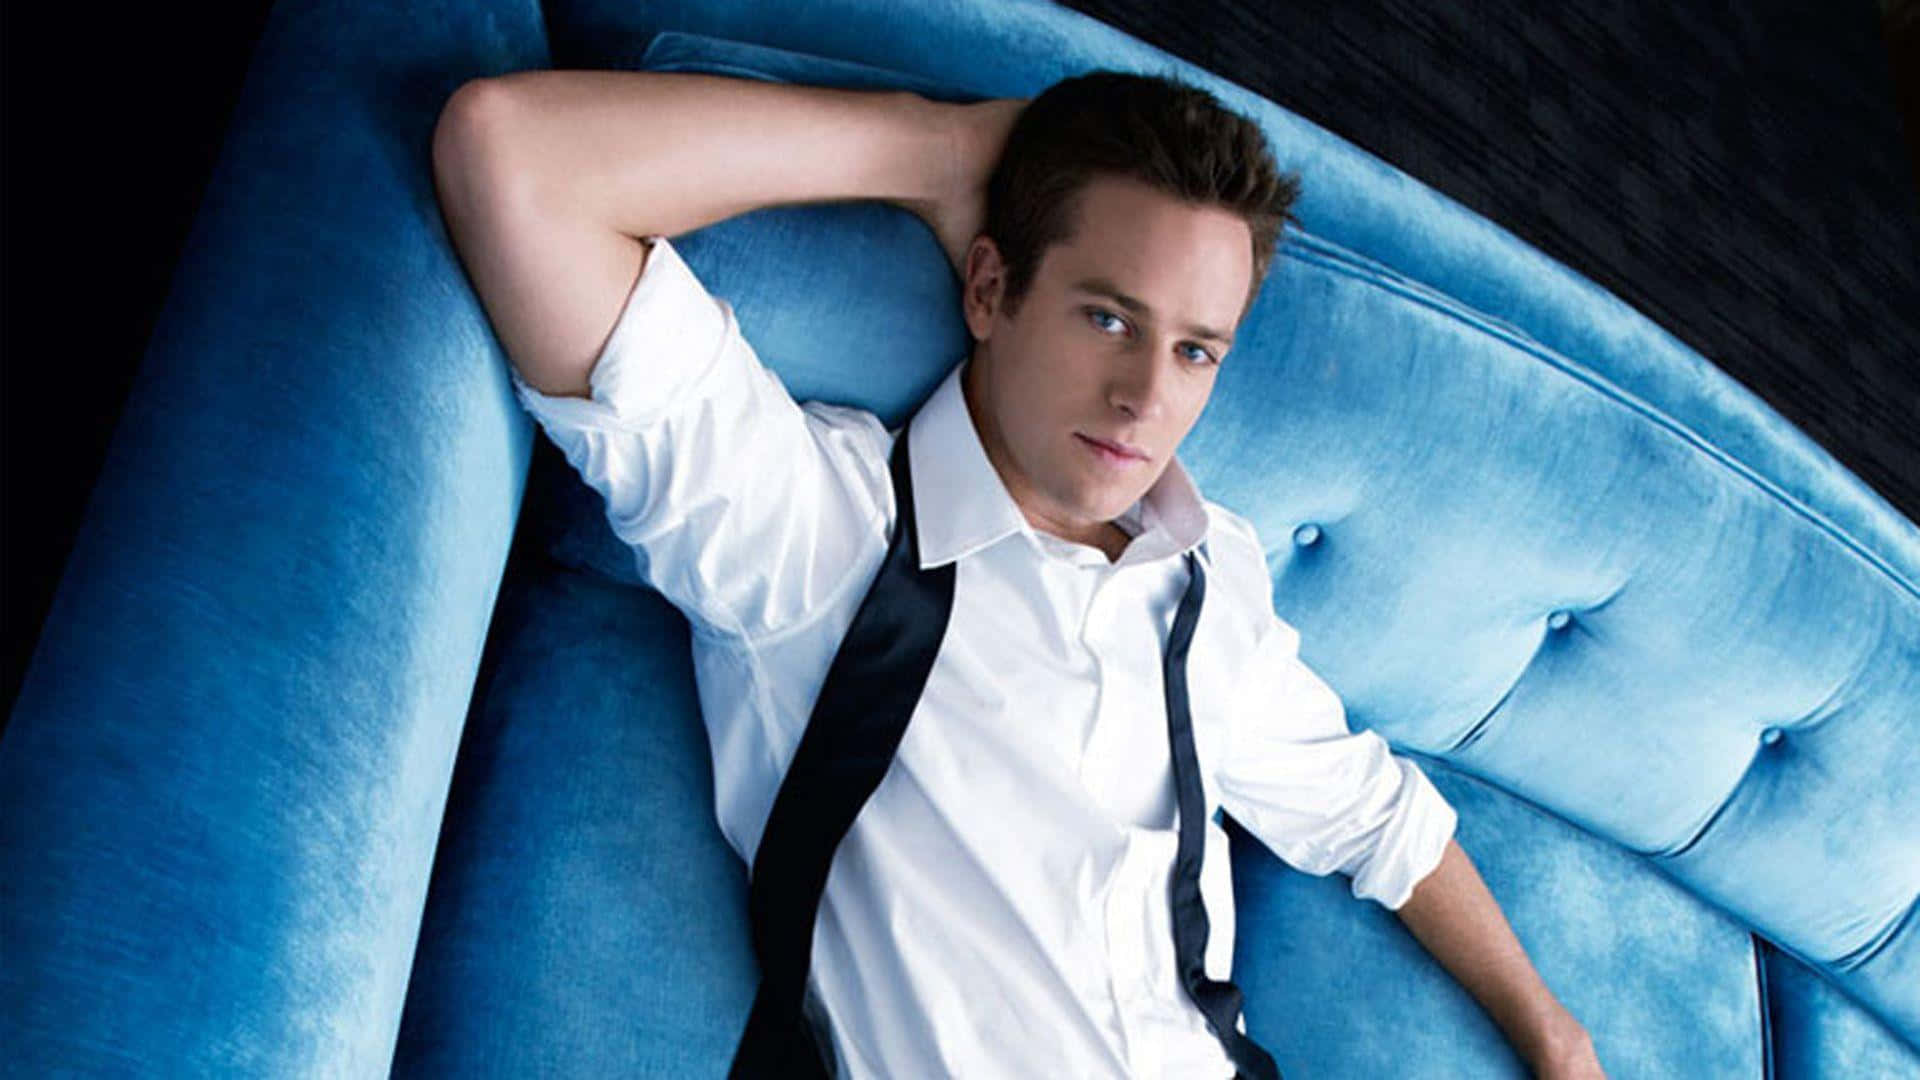 Armie Hammer looking self-assured and confident